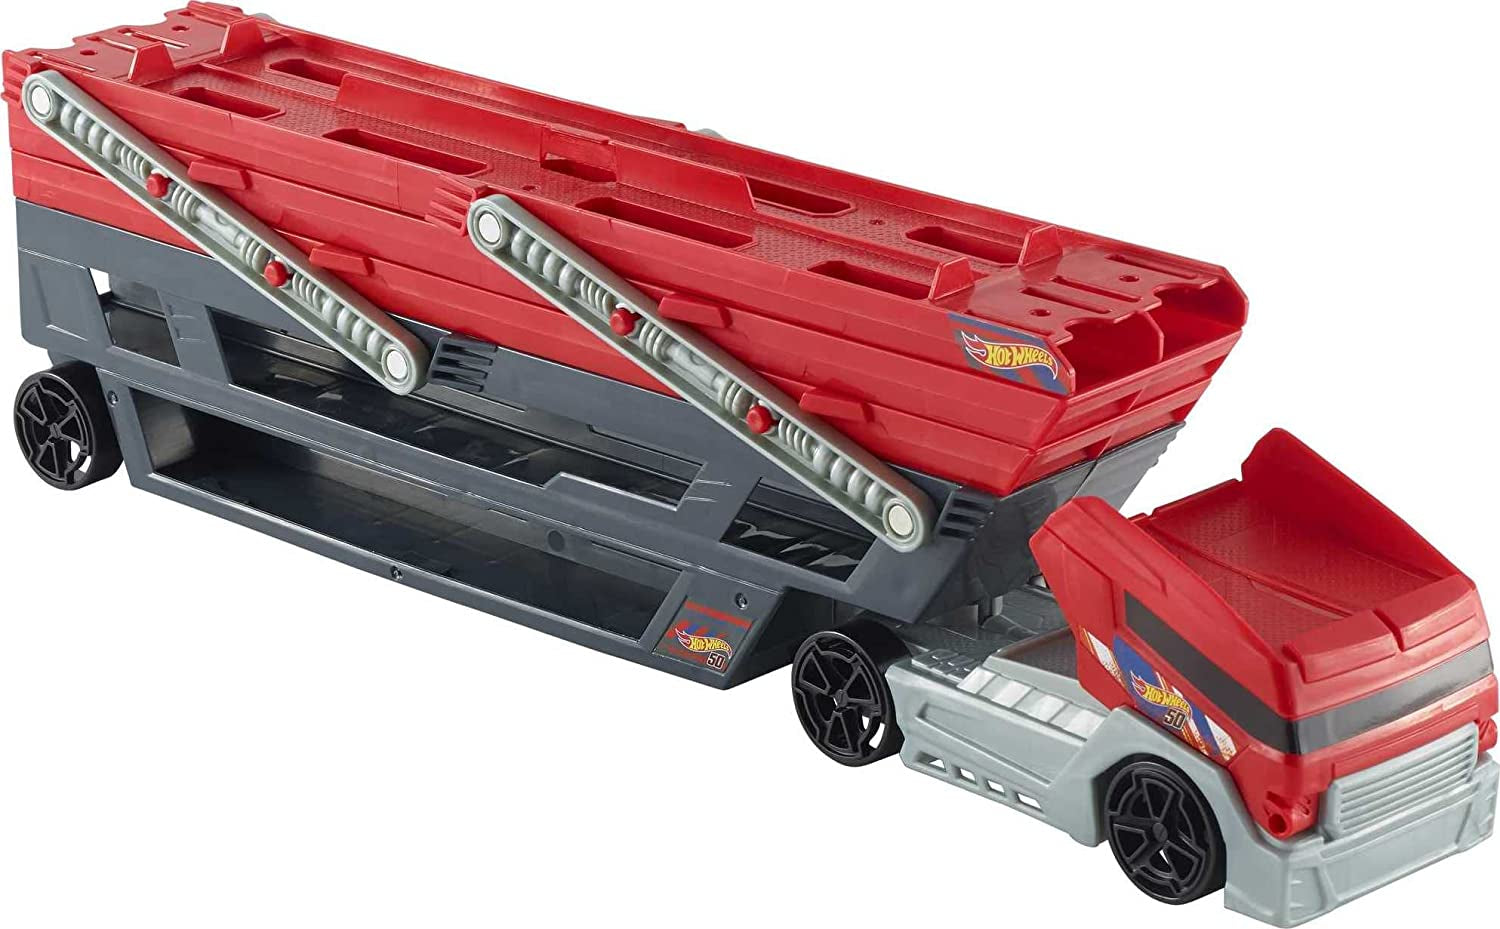 Hot Wheels HW Mega Hauler Truck, Semi Holds More than 50 Toy Cars & Expands to 6 Levels, Connects to Hot Wheels Track, Toy for Kids 3 Years & Older [Amazon Exclusive]